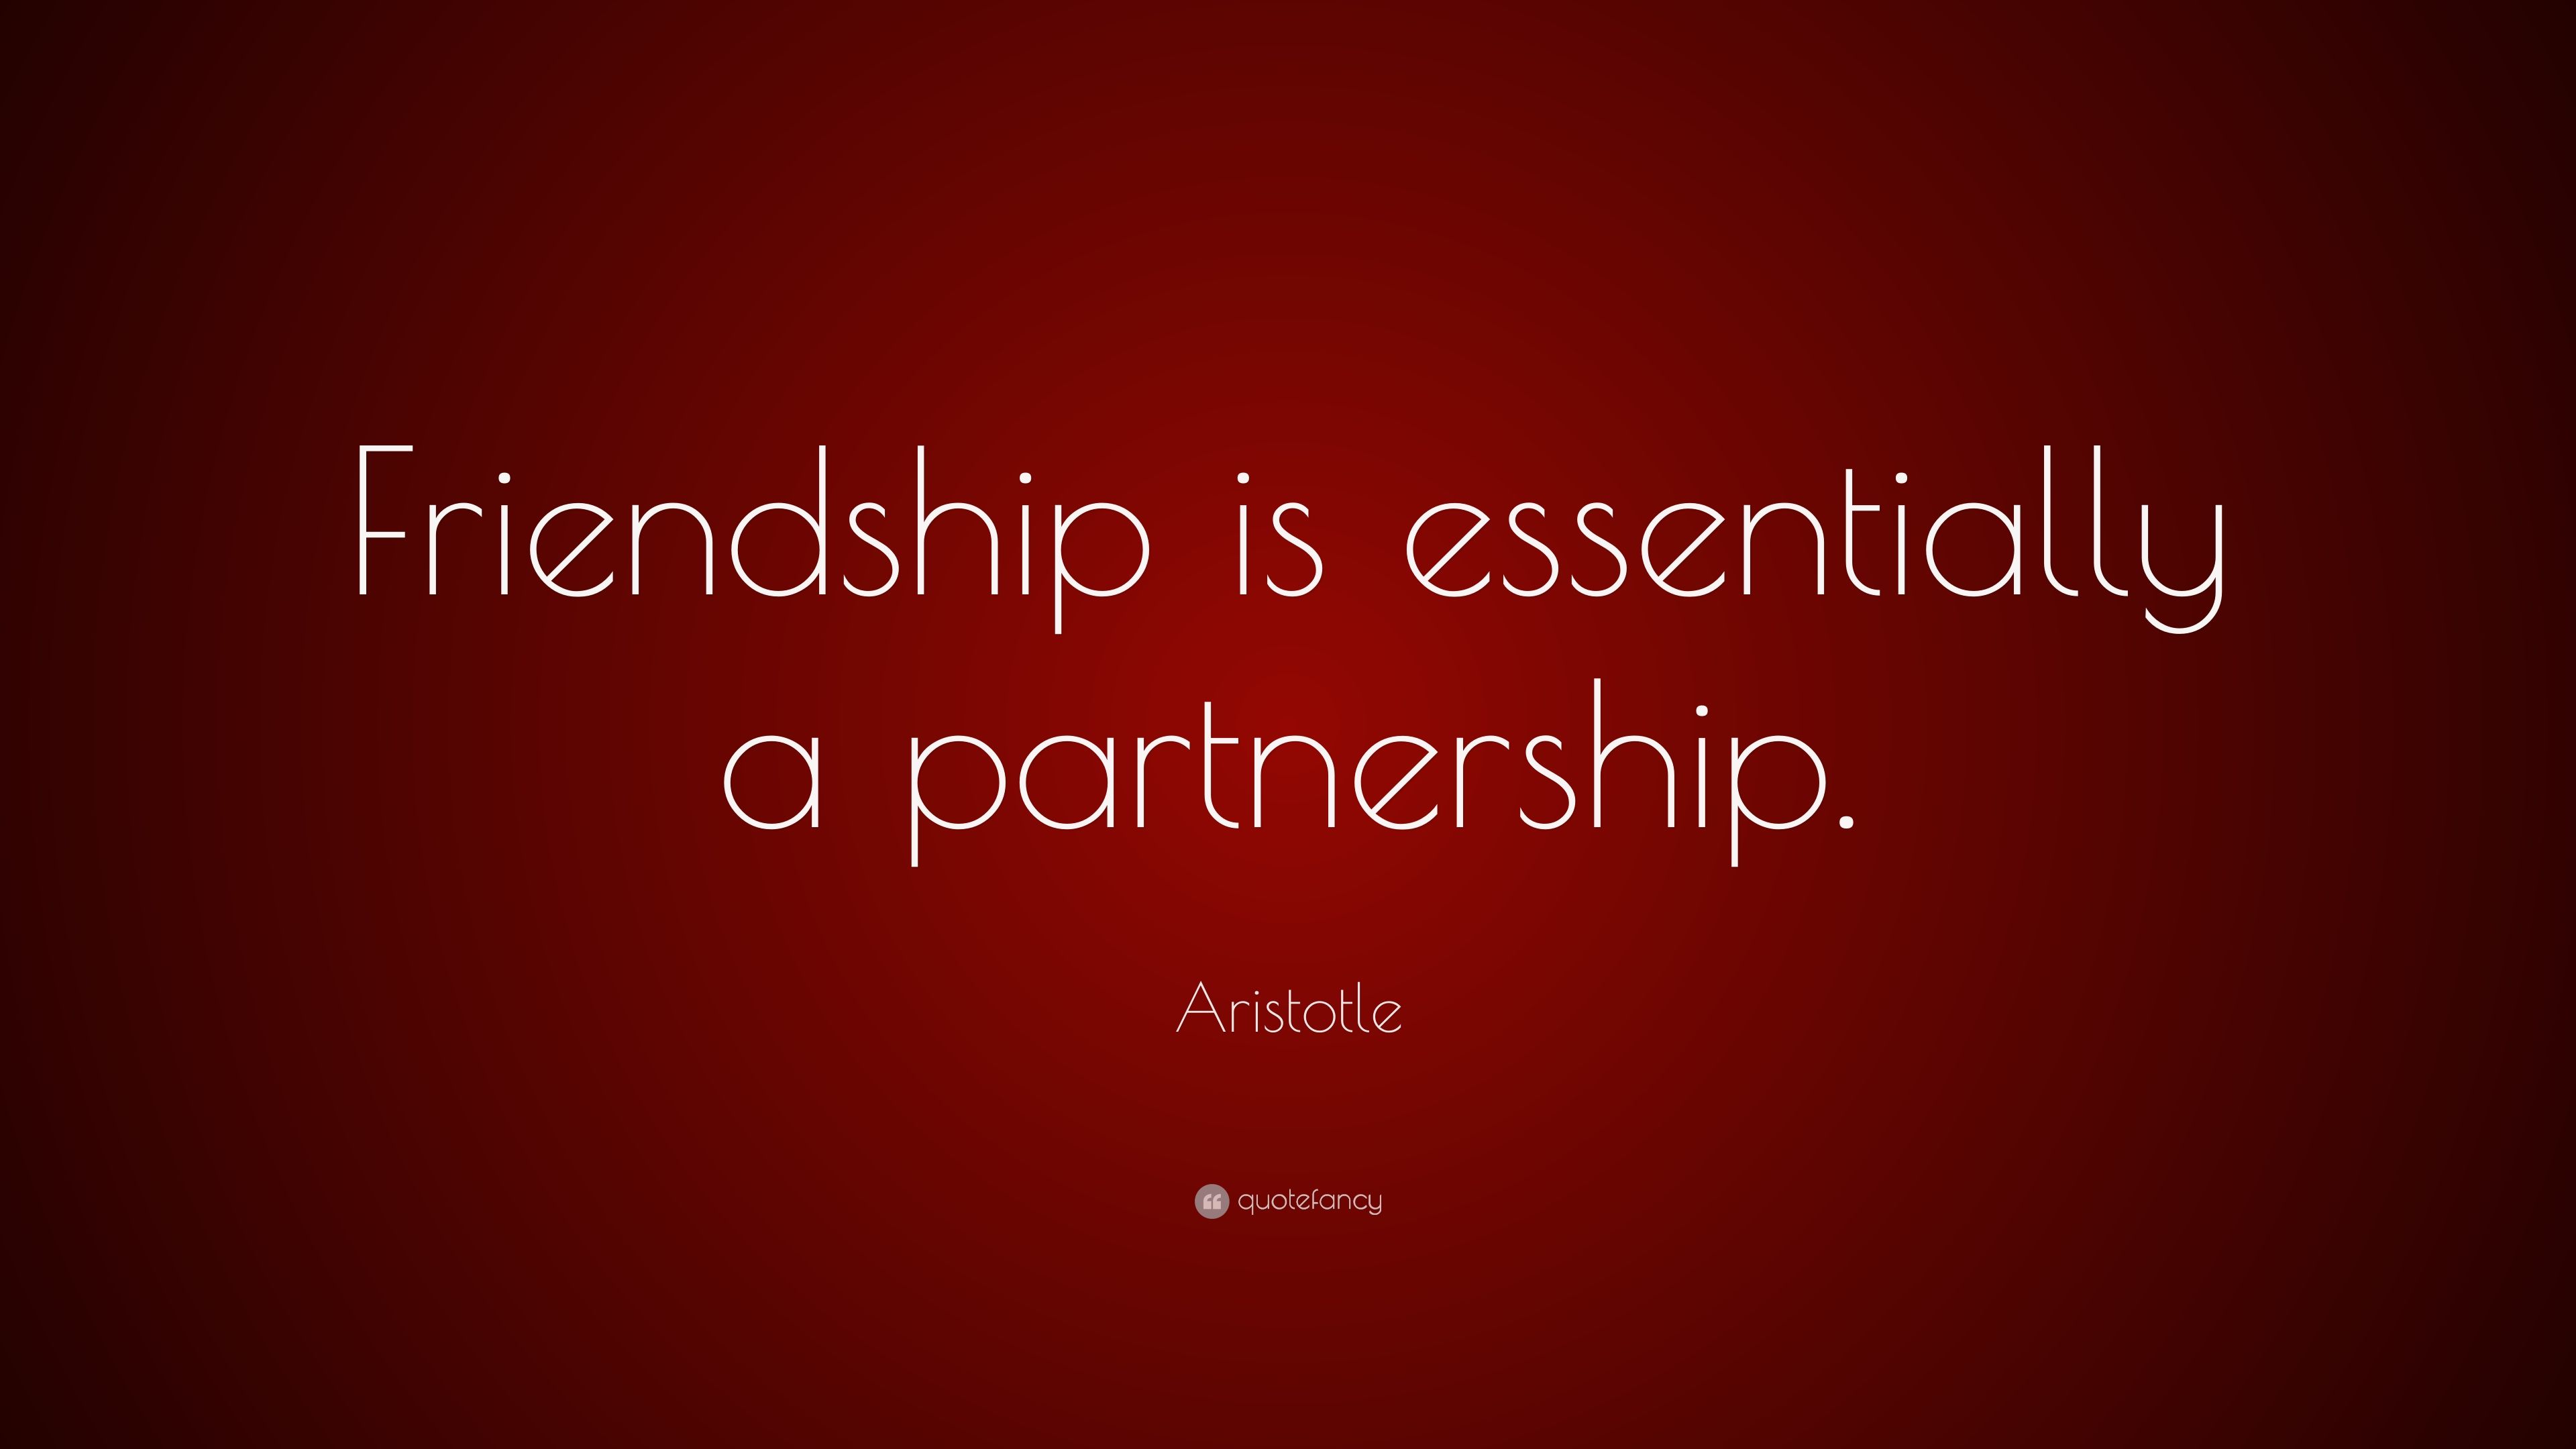 Aristotle Quote: “Friendship is essentially a partnership.” (7 wallpaper)